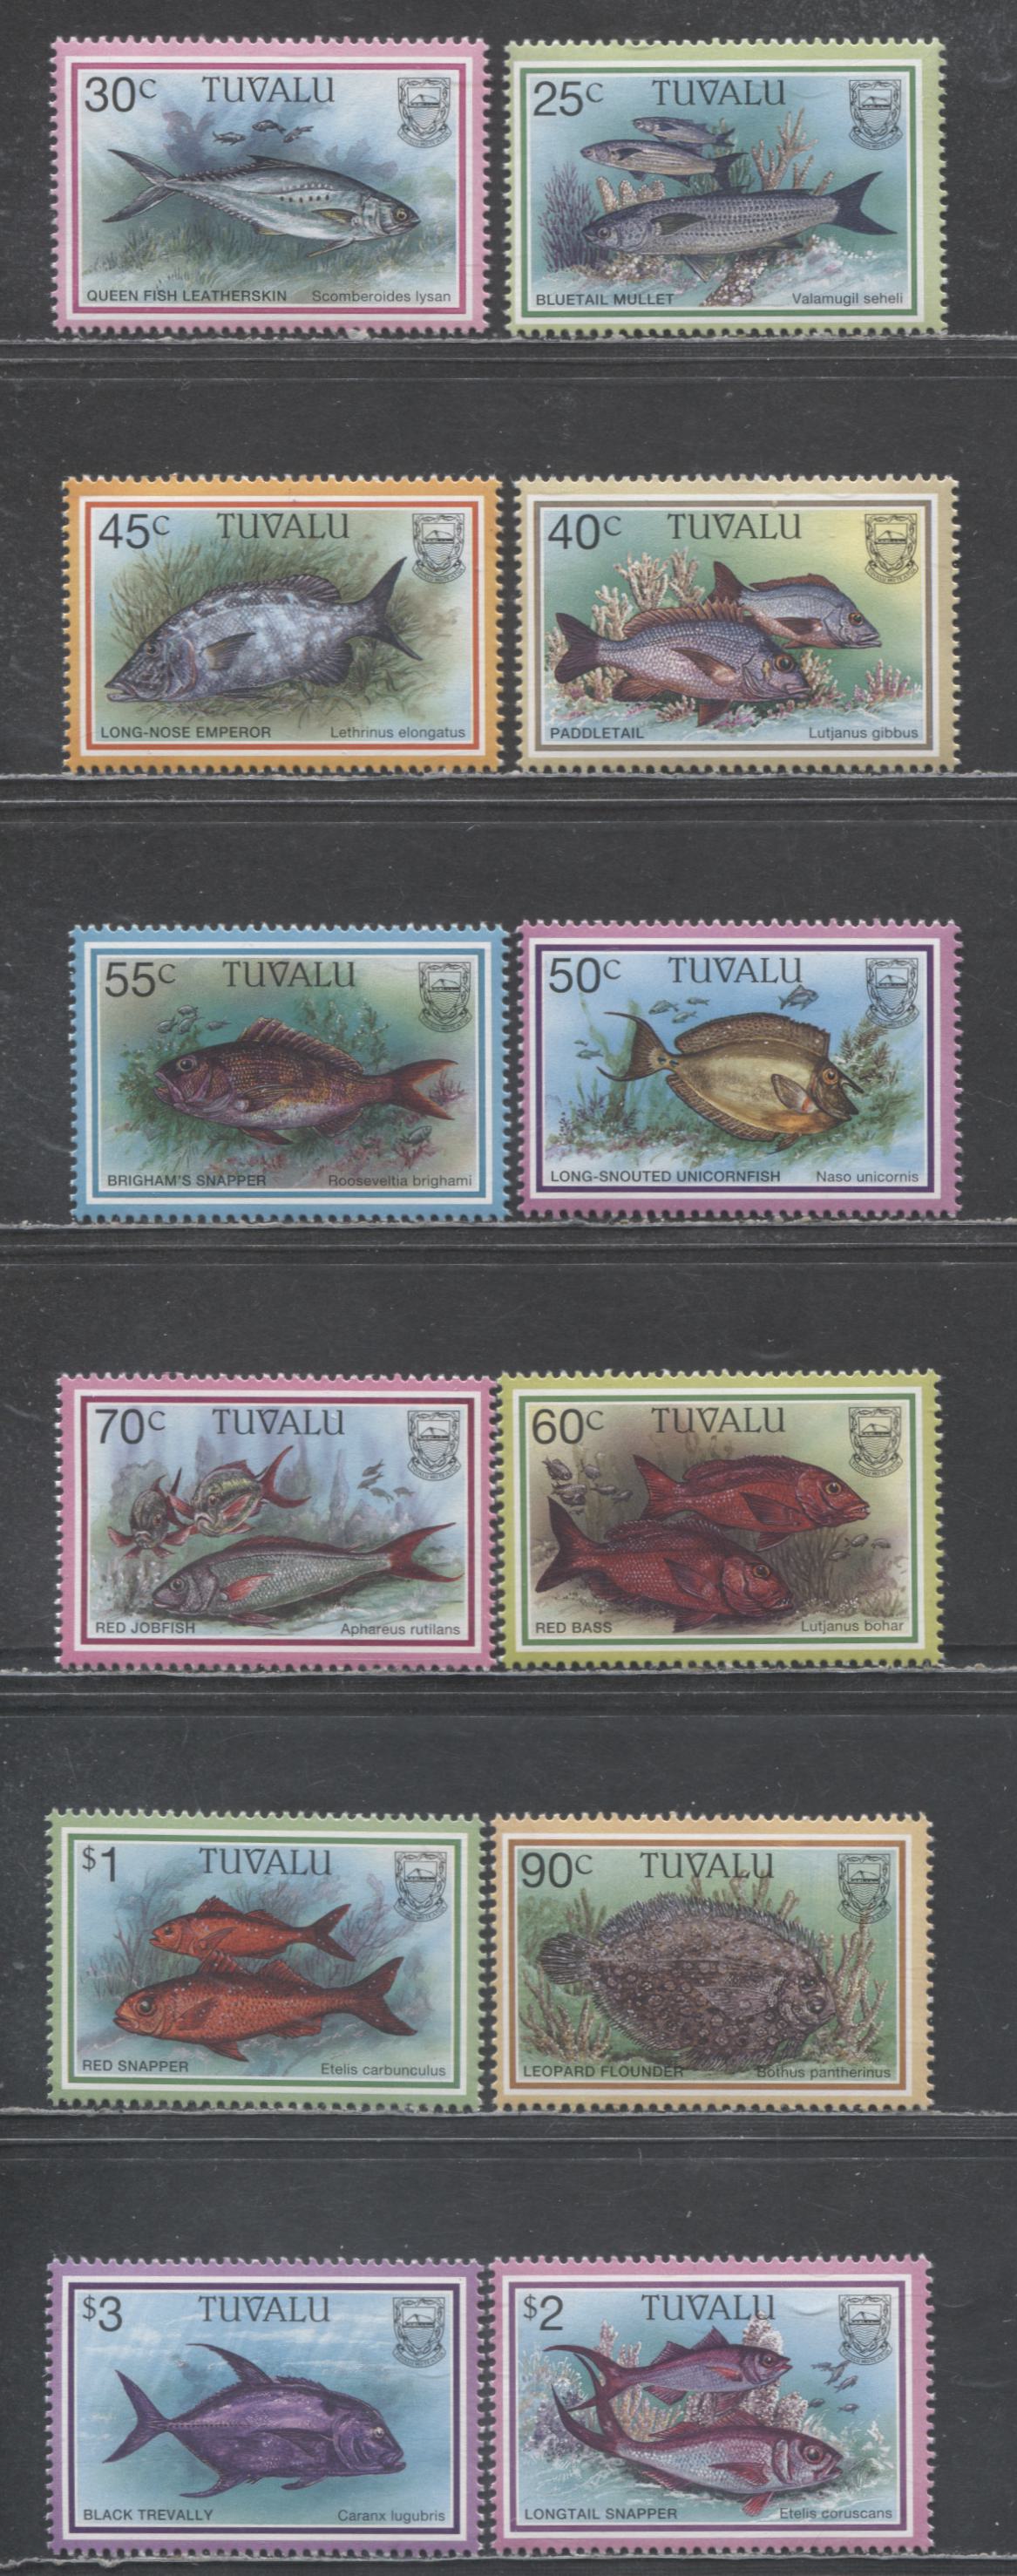 Lot 64 Tuvalu SC#729-740 1997 Fish Issues, 12 VFNH Singles, Click on Listing to See ALL Pictures, 2017 Scott Cat. $14.3